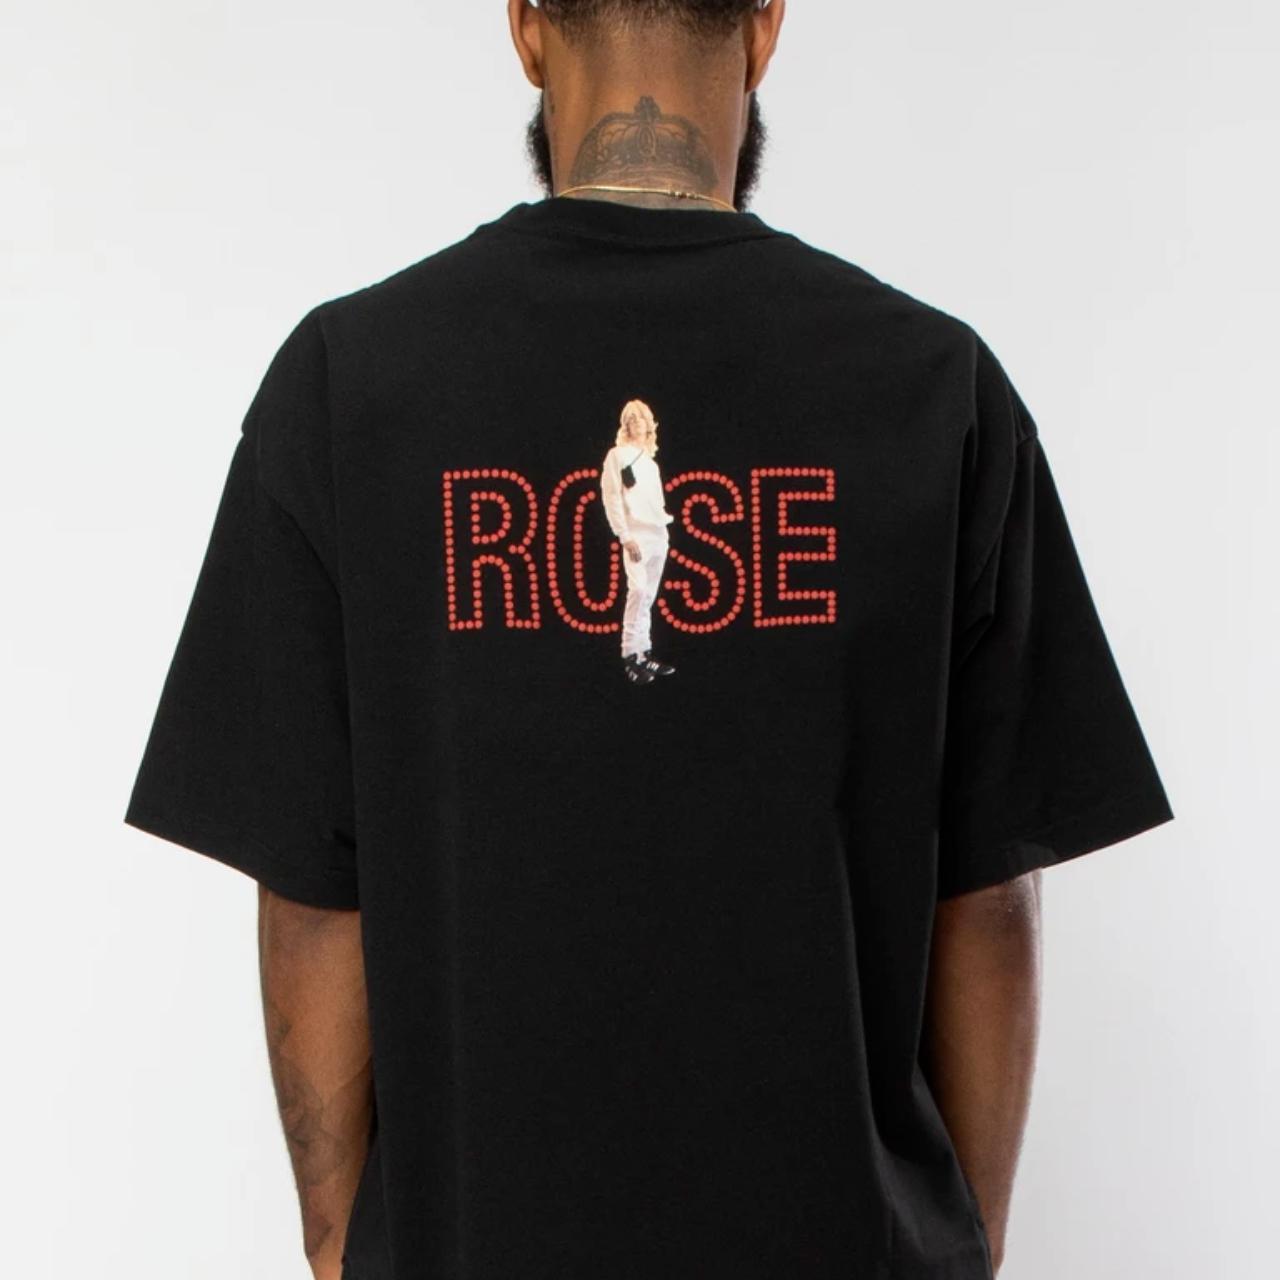 Men's Black and Red T-shirt